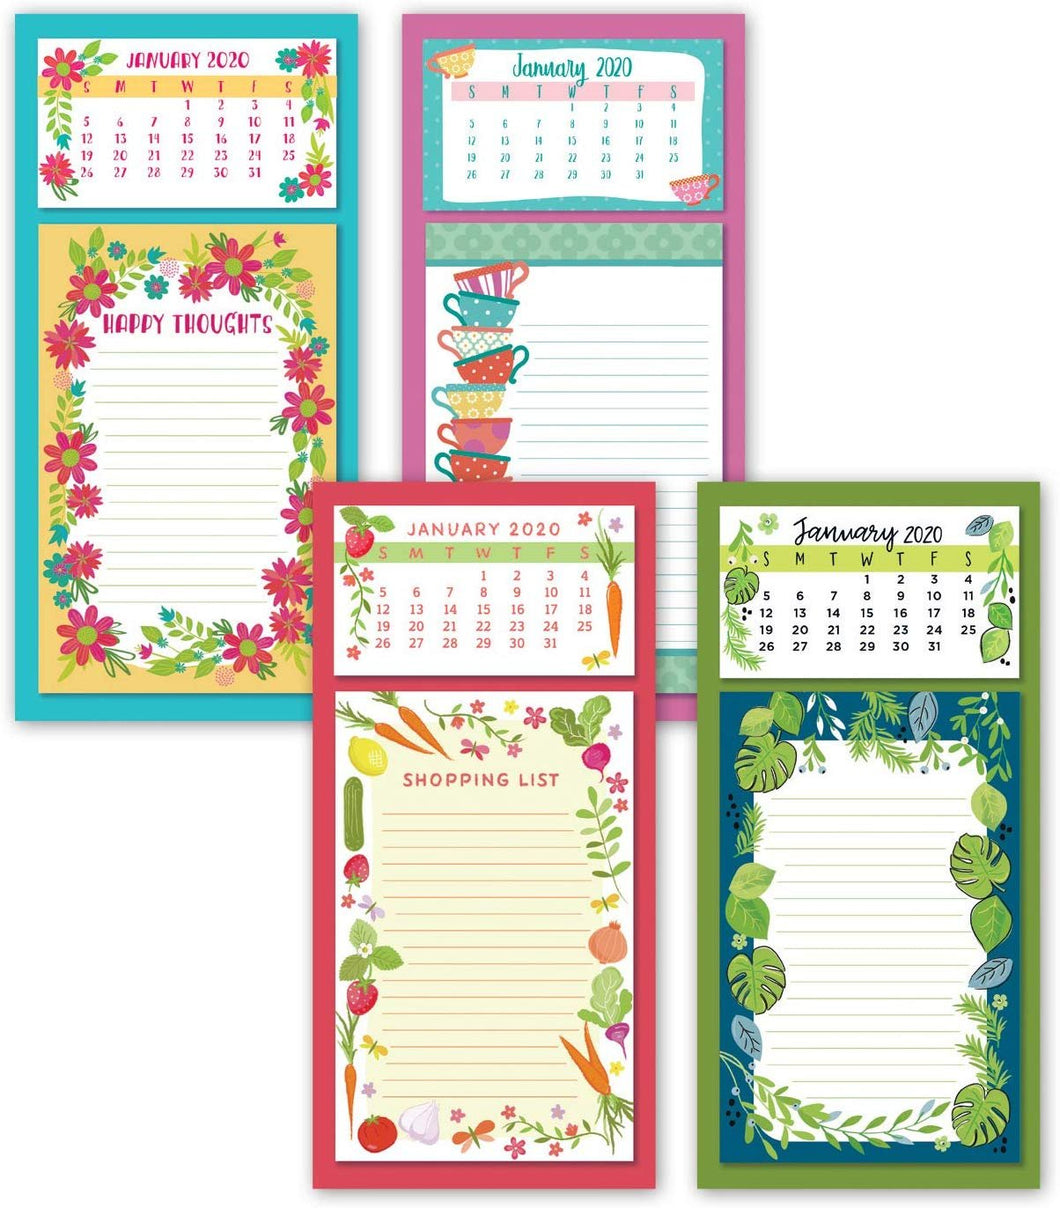 B-THERE Bundle of 4 Magnetic Listpad Calendars with 12 Month 2020 Tear-Off Pad & 60 Tear-Off List Pages